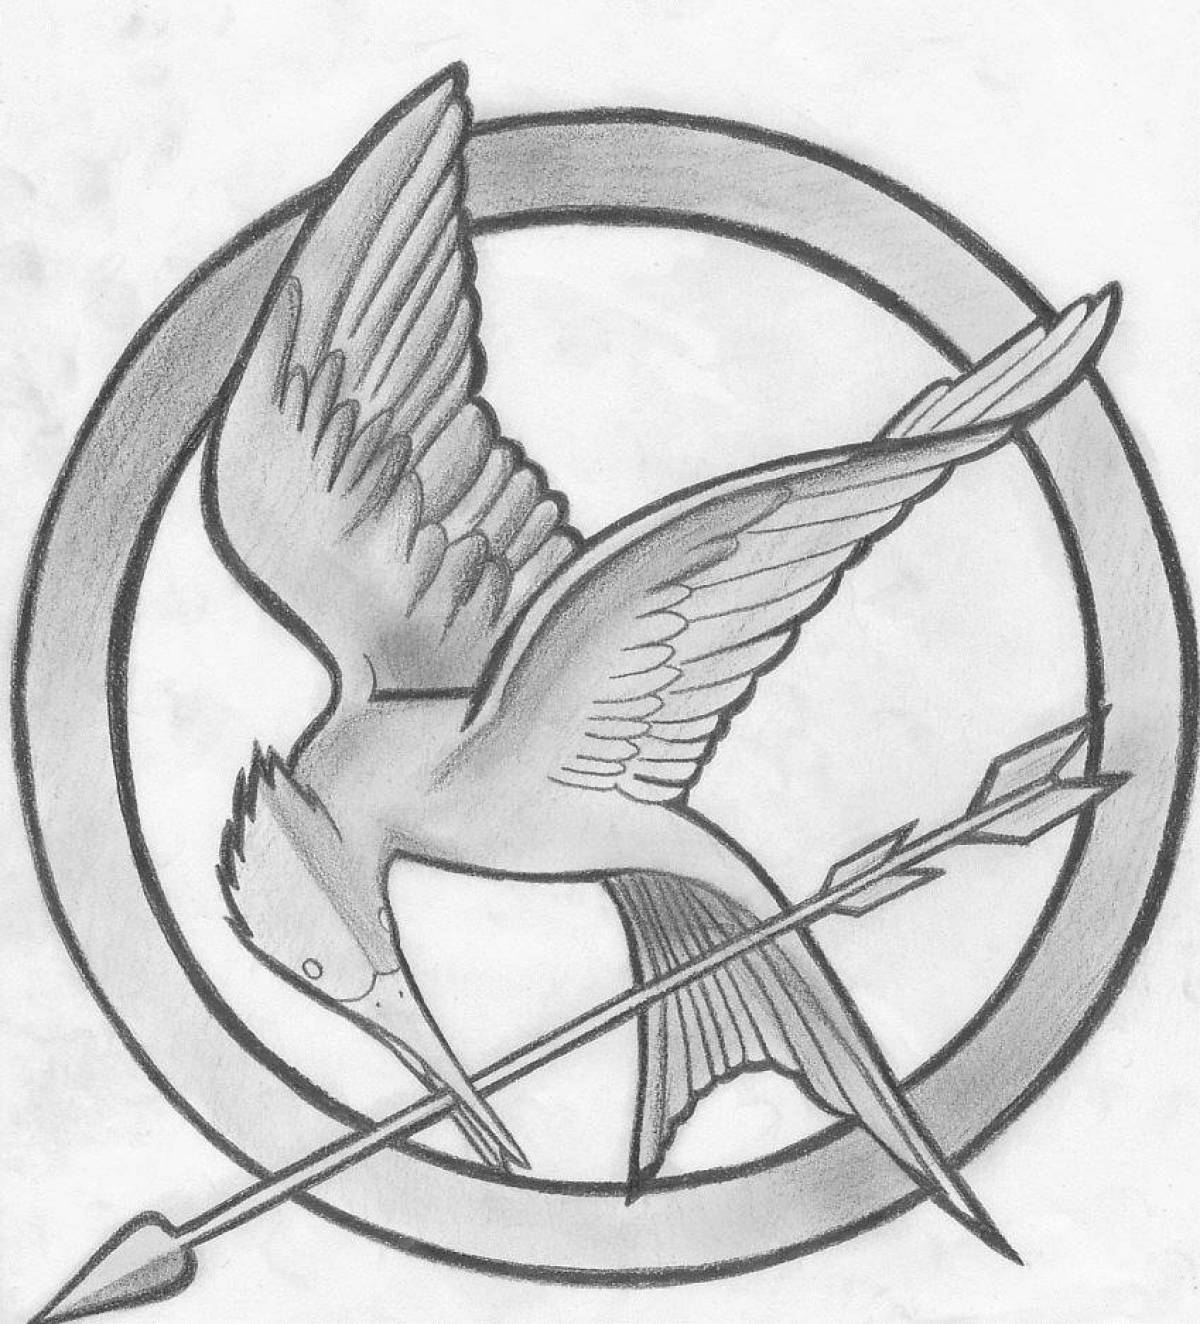 The hunger games incredible coloring book